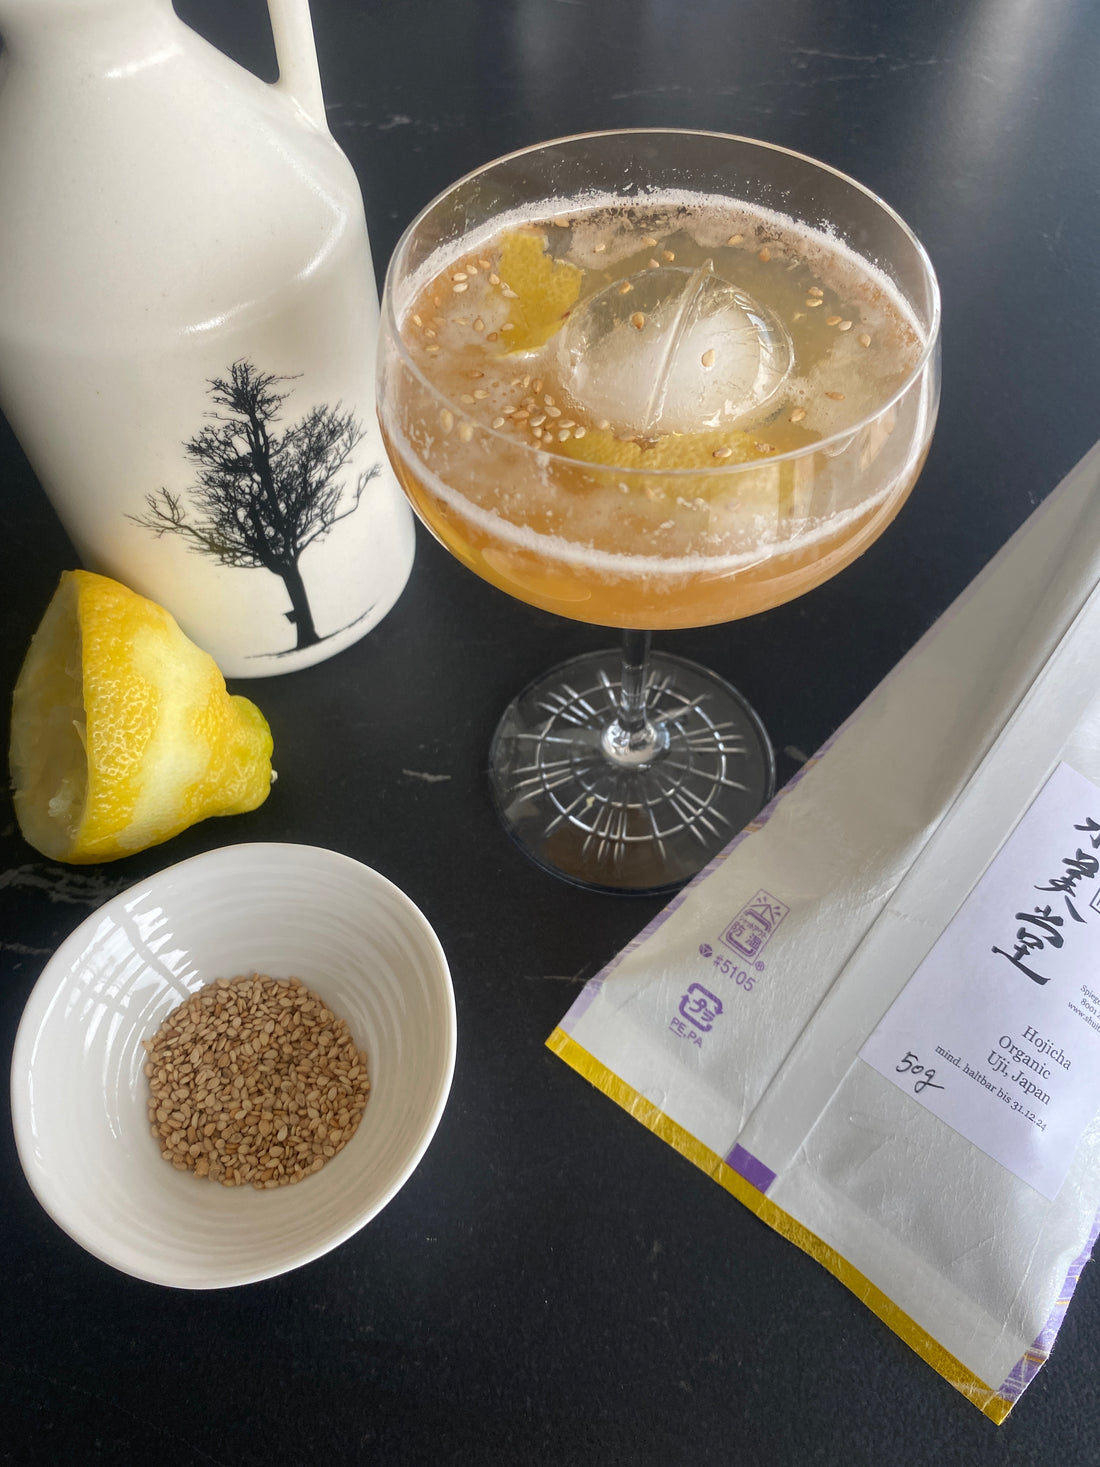 hojicha tea cocktail, sesame seeds and maple syrup bottle